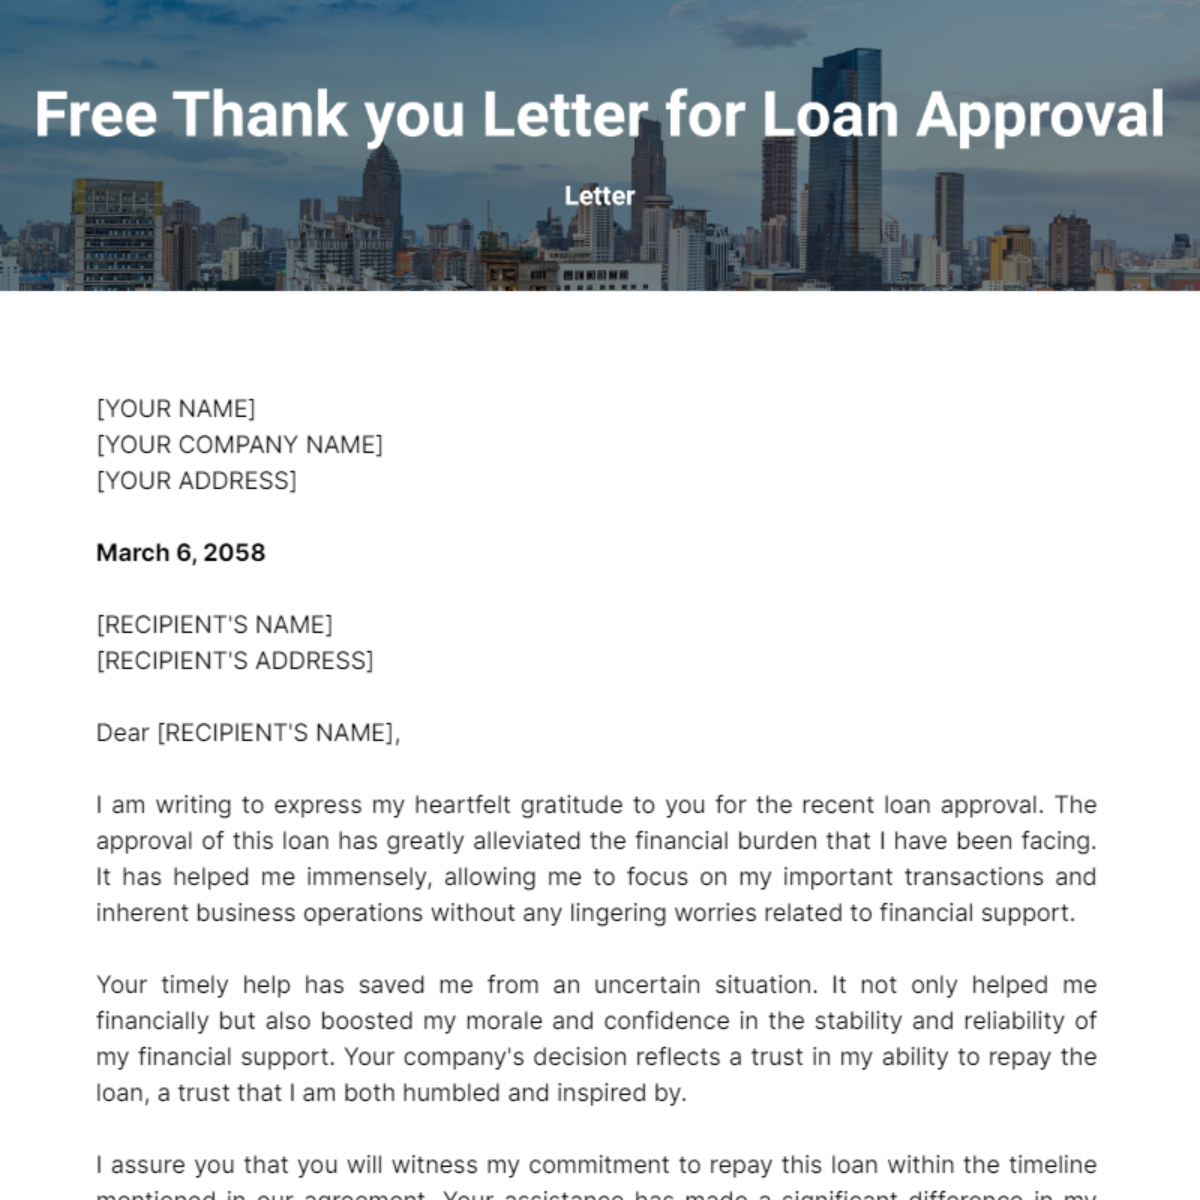 Thank you Letter for Loan Approval Template